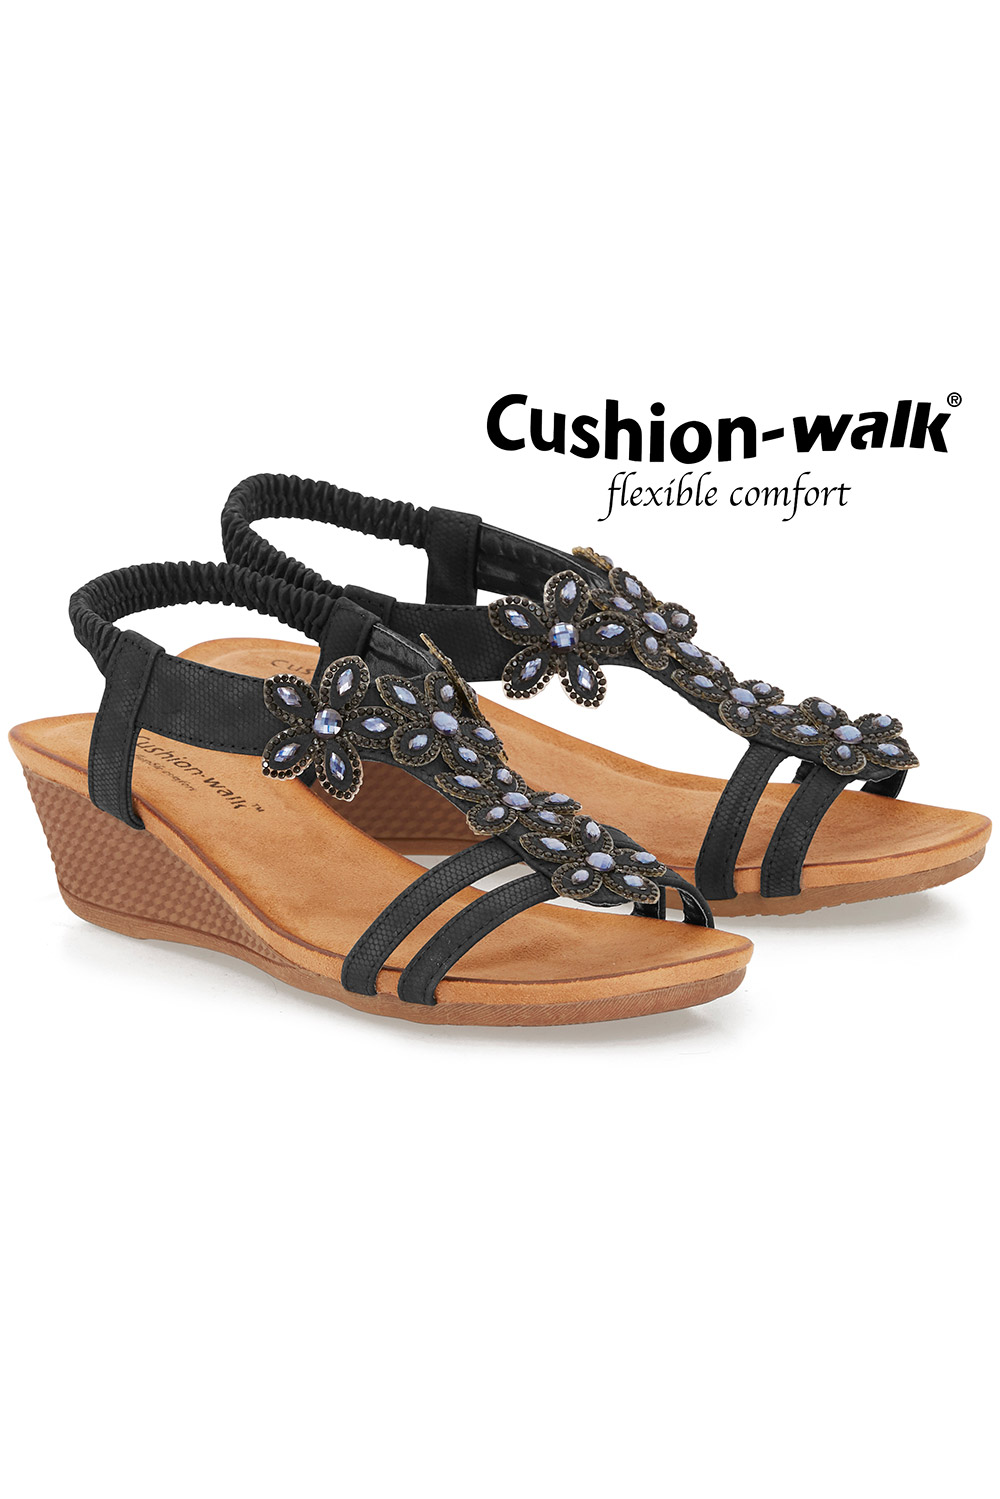 Womens Slip On Wide Fitting Summer Holiday Sandals Shoes with Flower Design  - Absolute Footwear